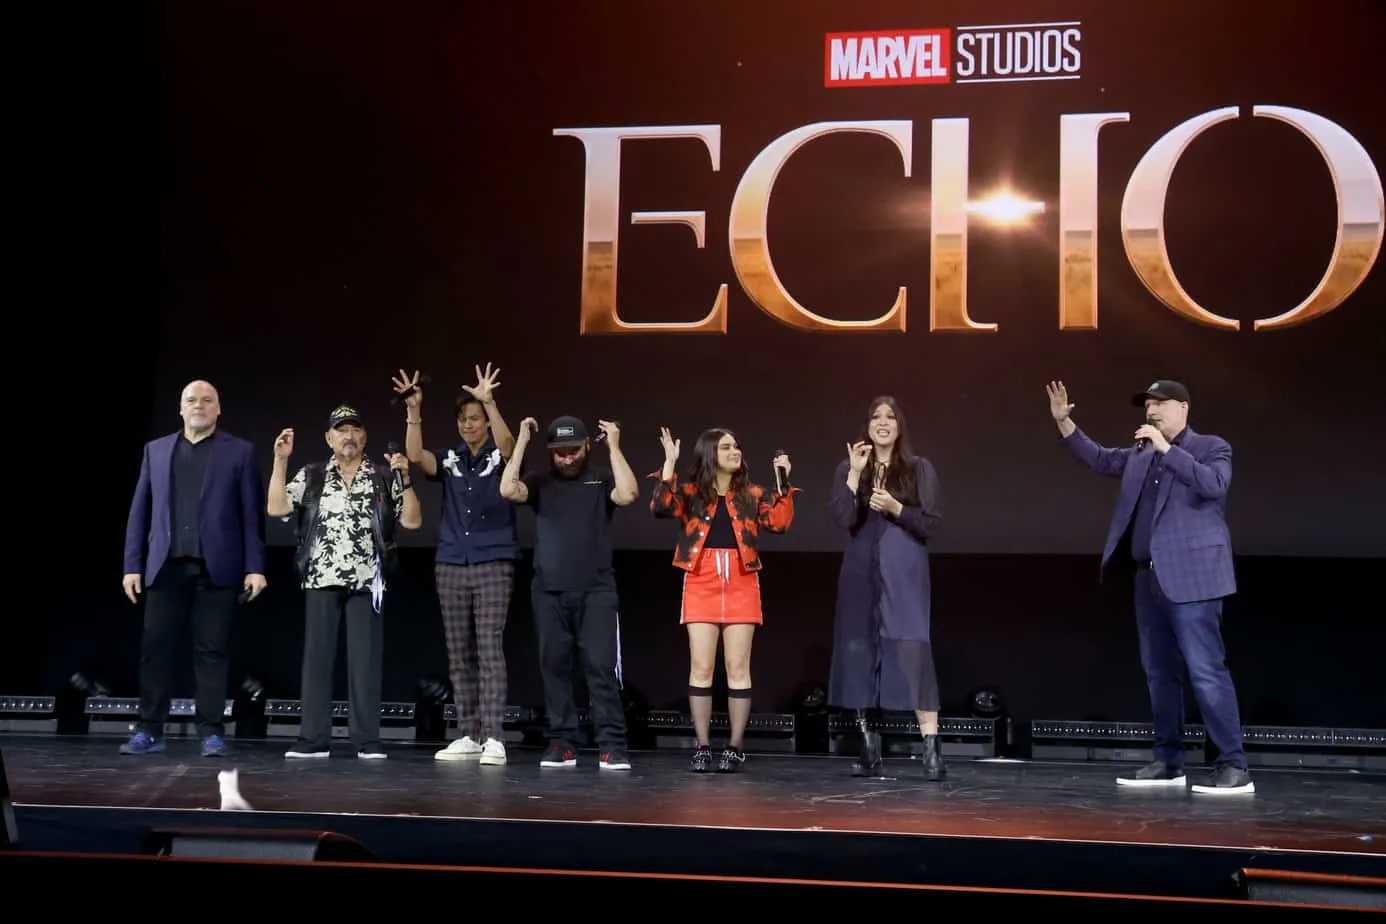 The cast of Echo on stage during the Marvel Studios panel at D23 Expo 2022 with the Echo logo behind them.